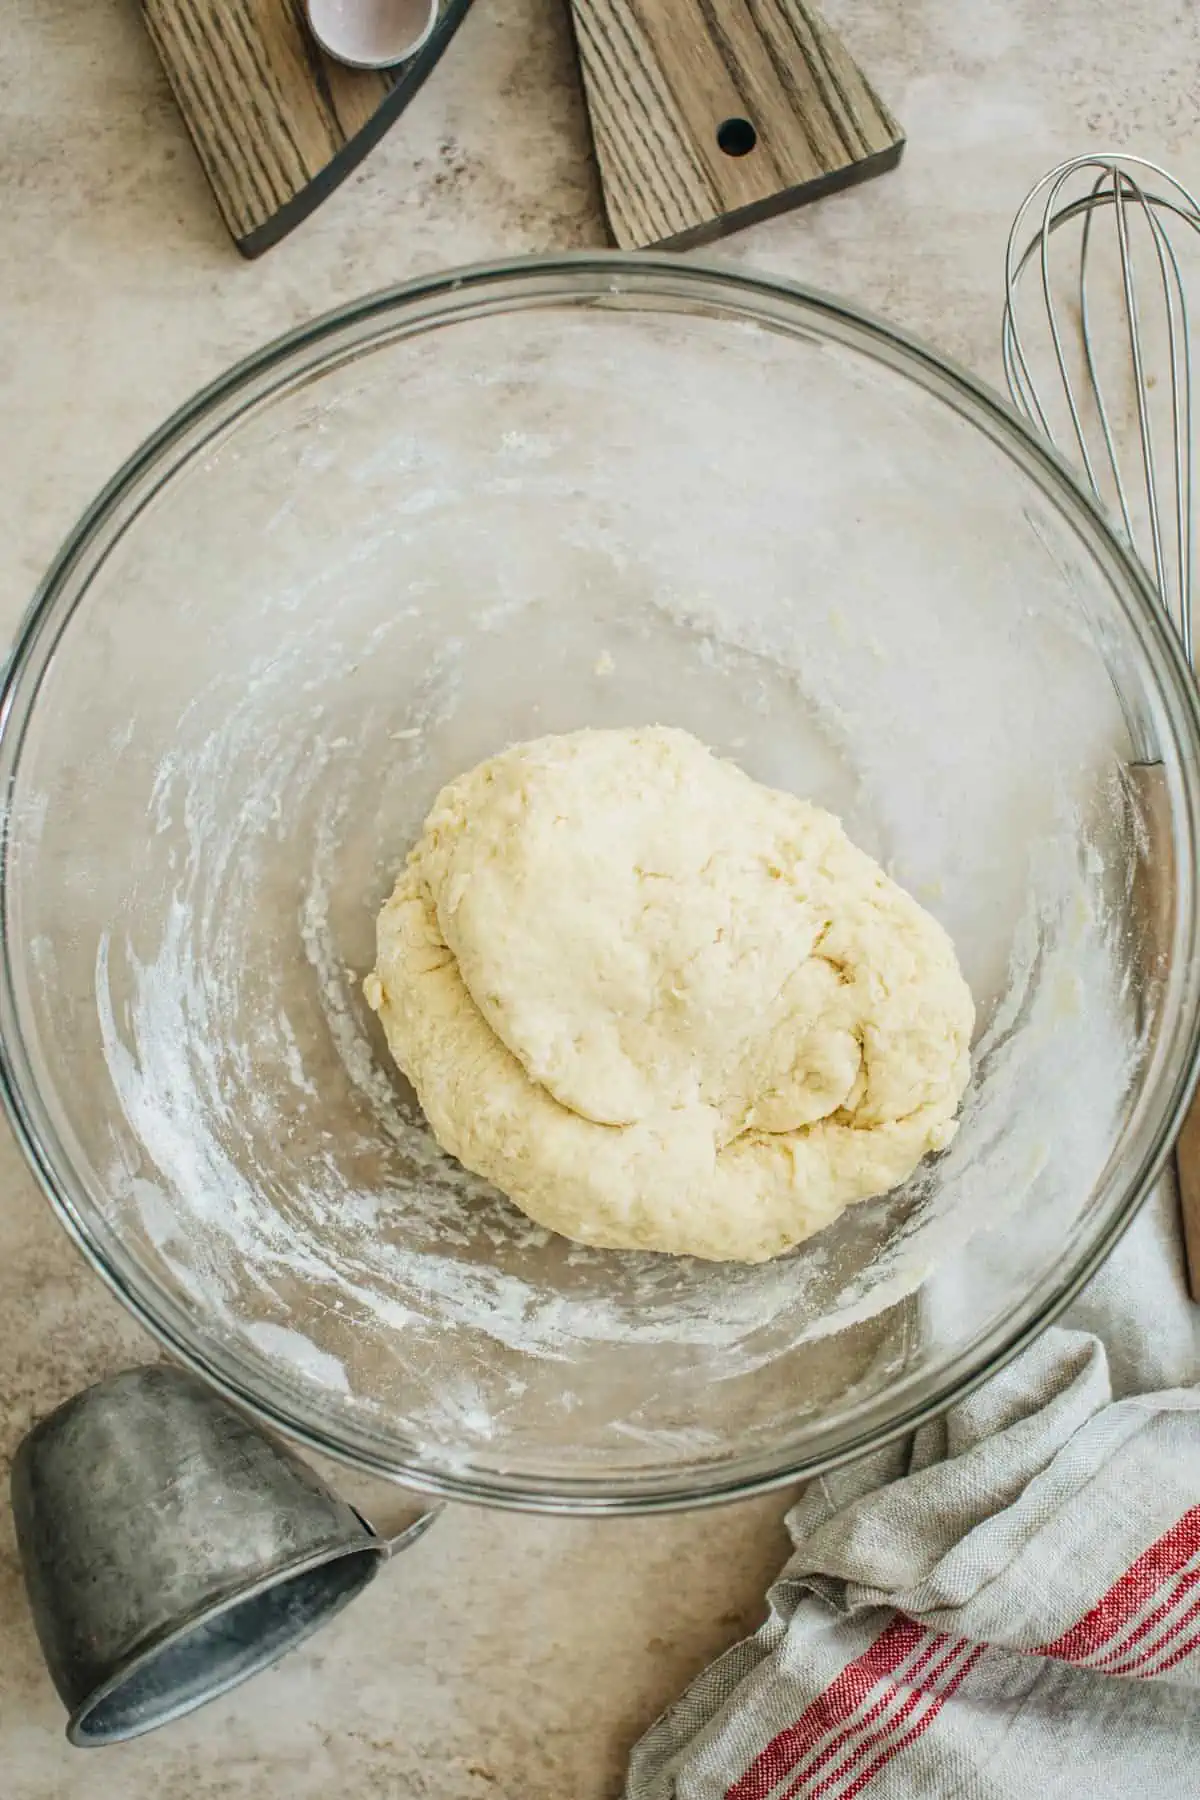 Kneaded dough in the shape of a ball for making English scones.